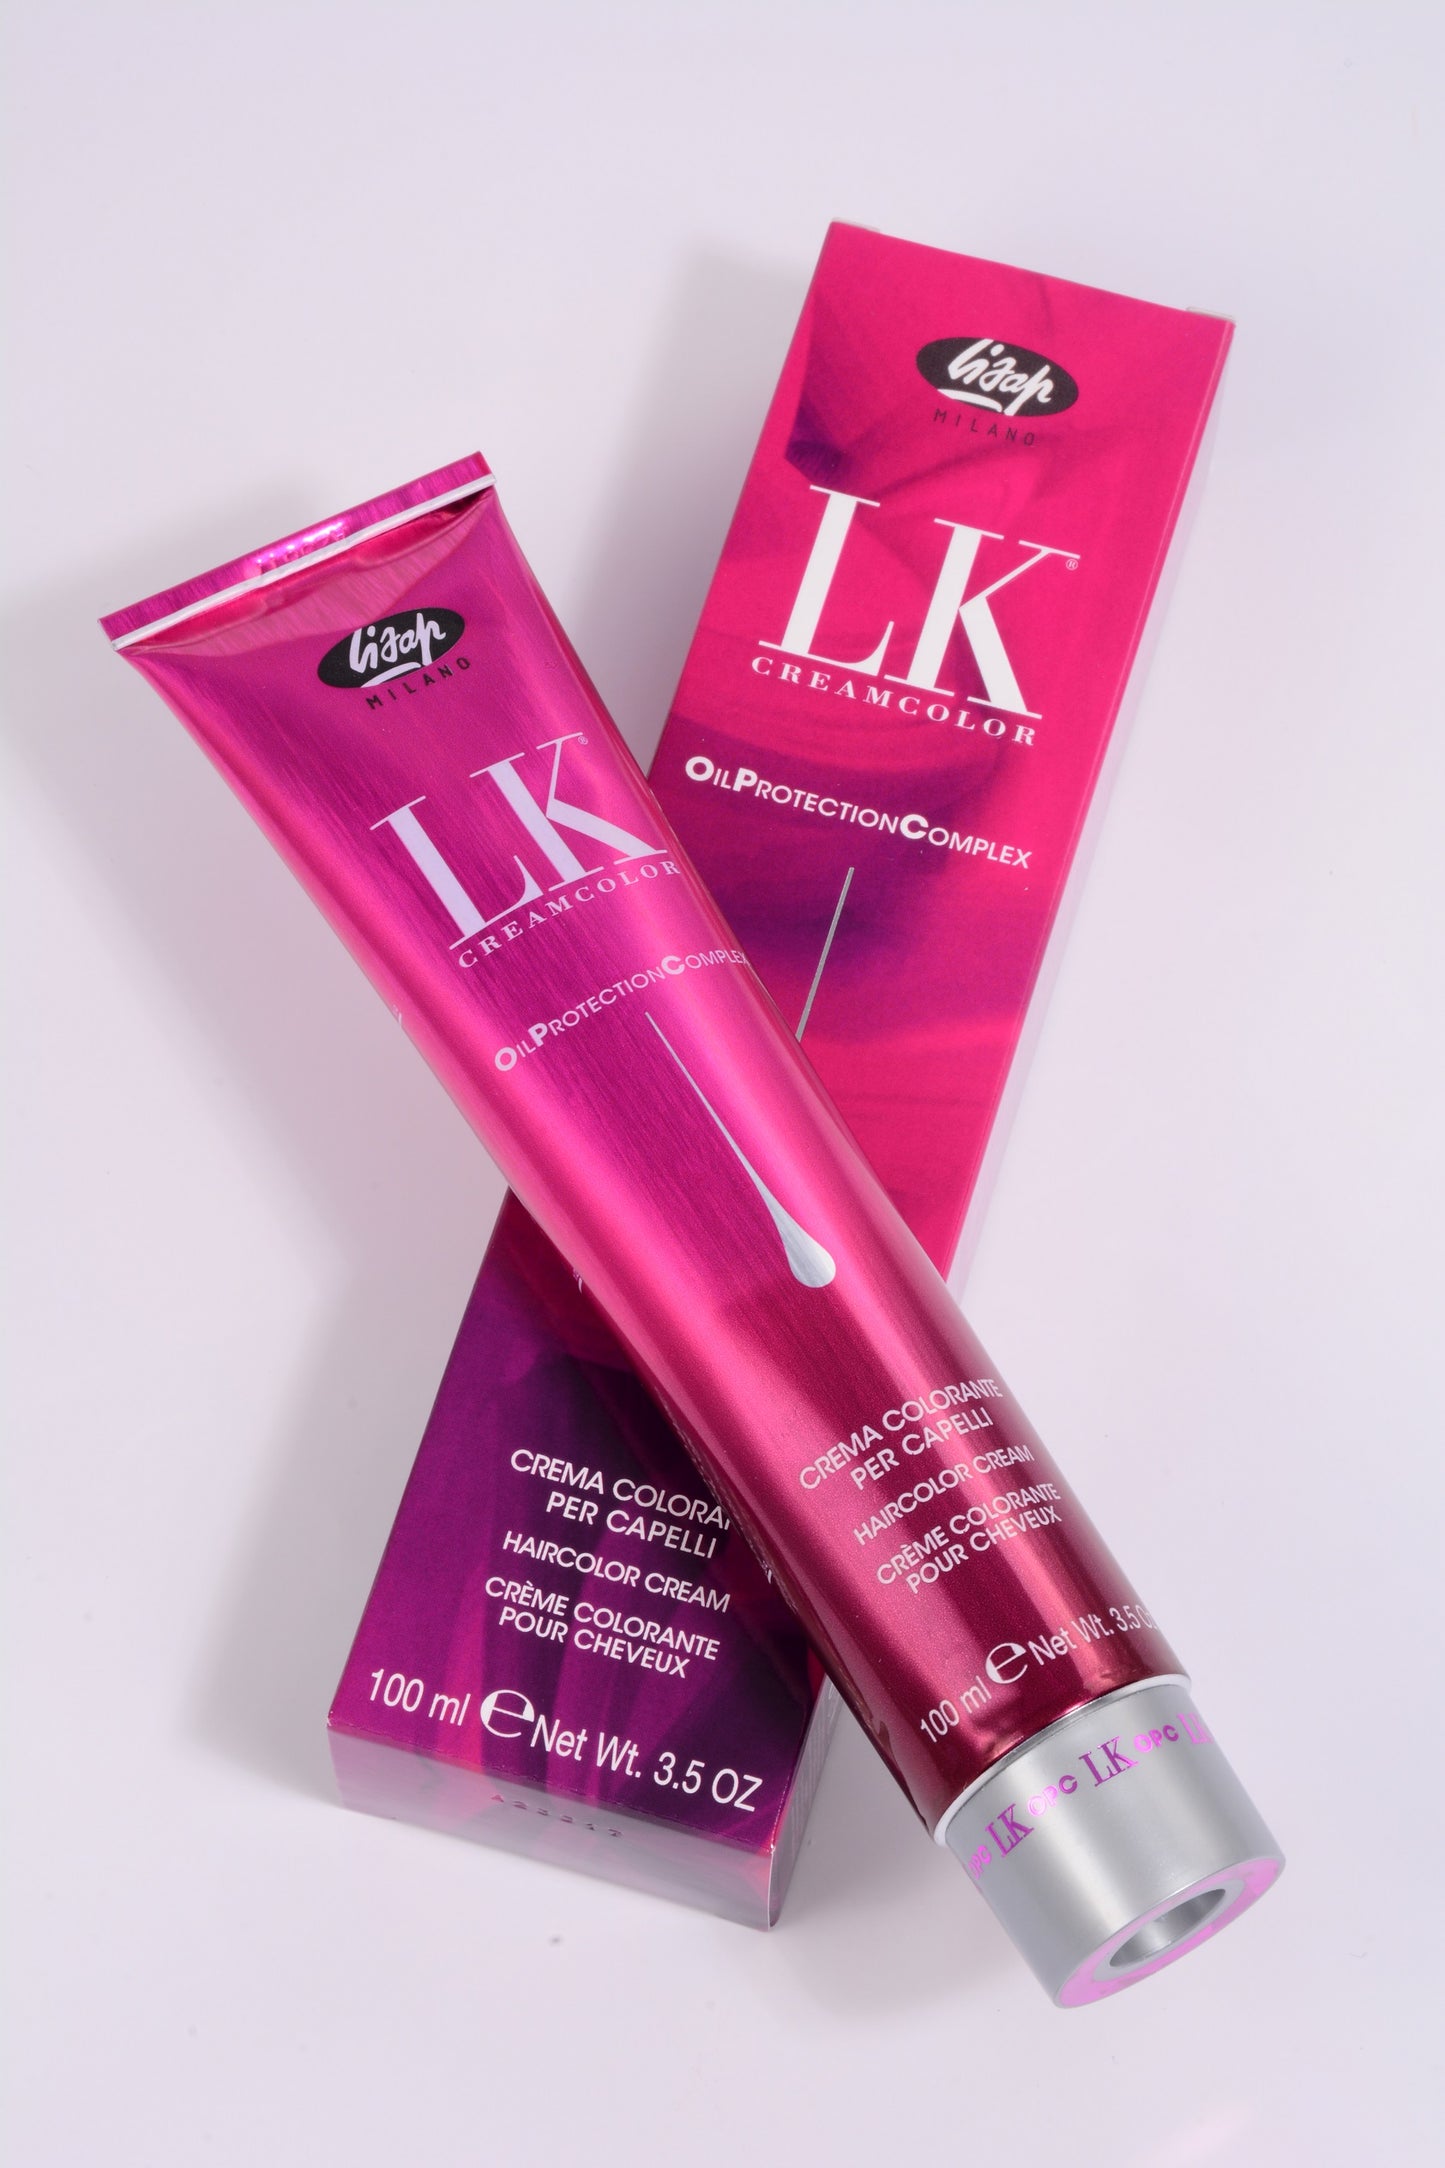 LK Creamcolor 88/00 Oil Protection Complex